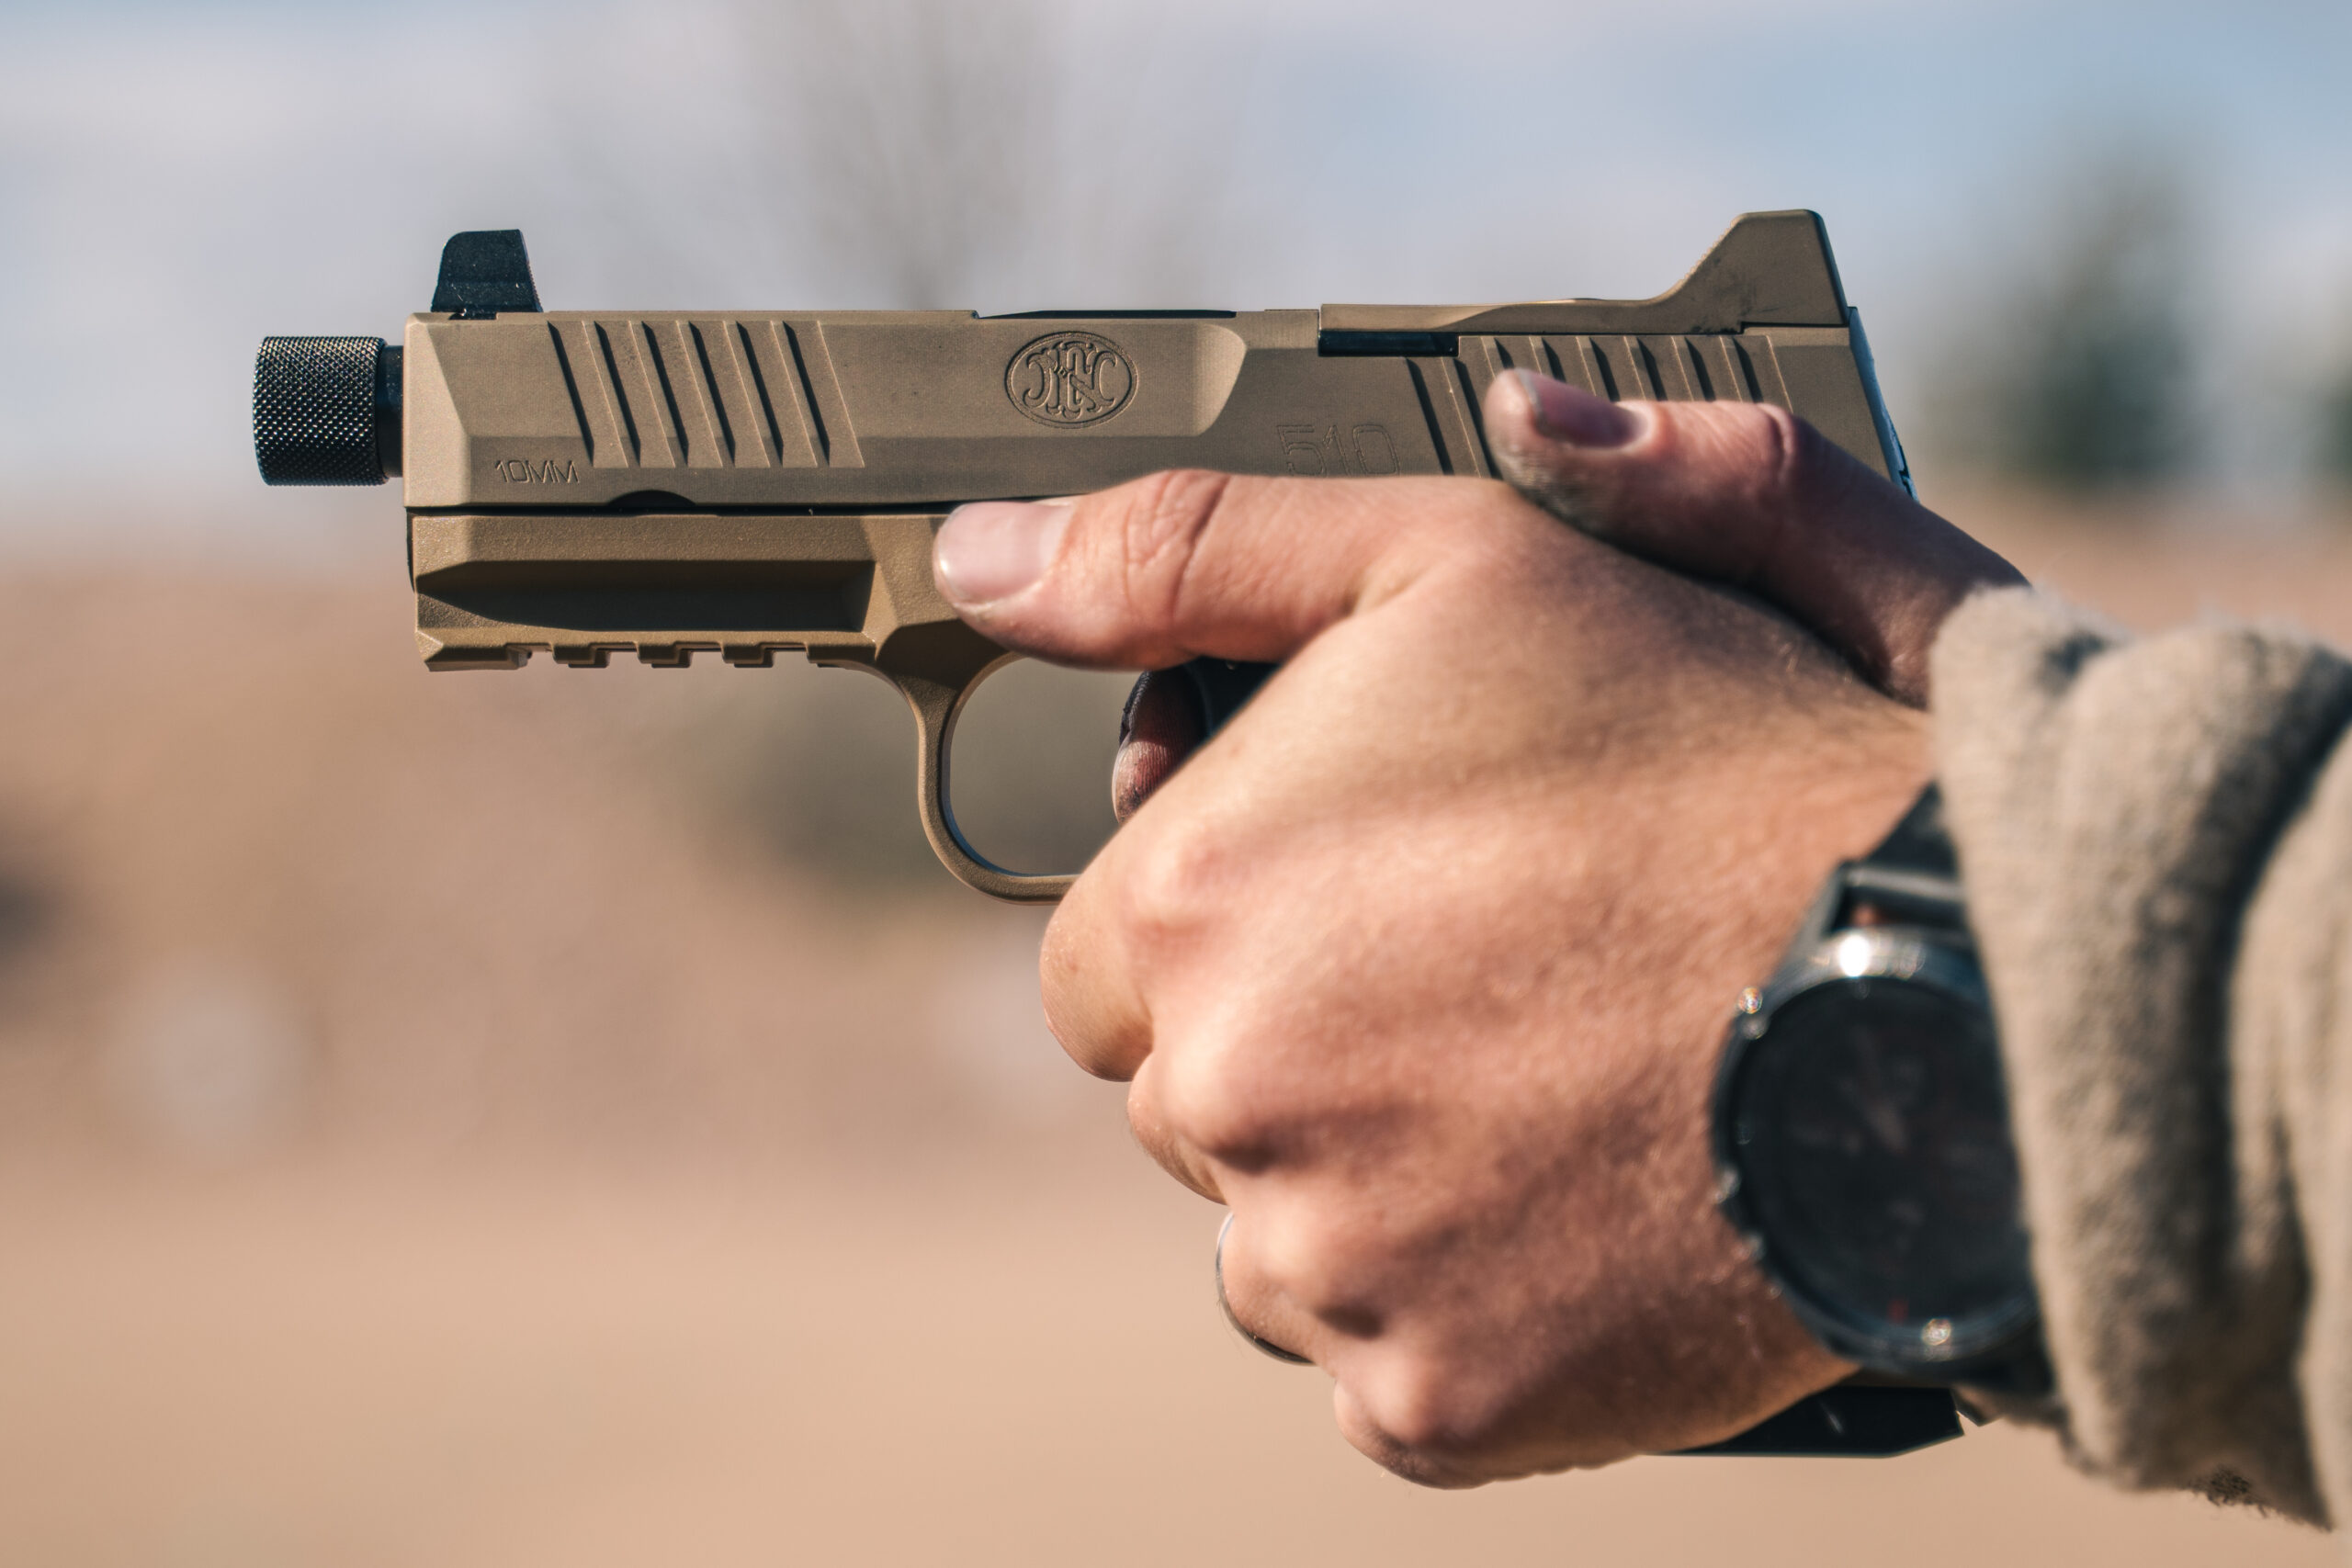 How to Shoot a Pistol Accurately